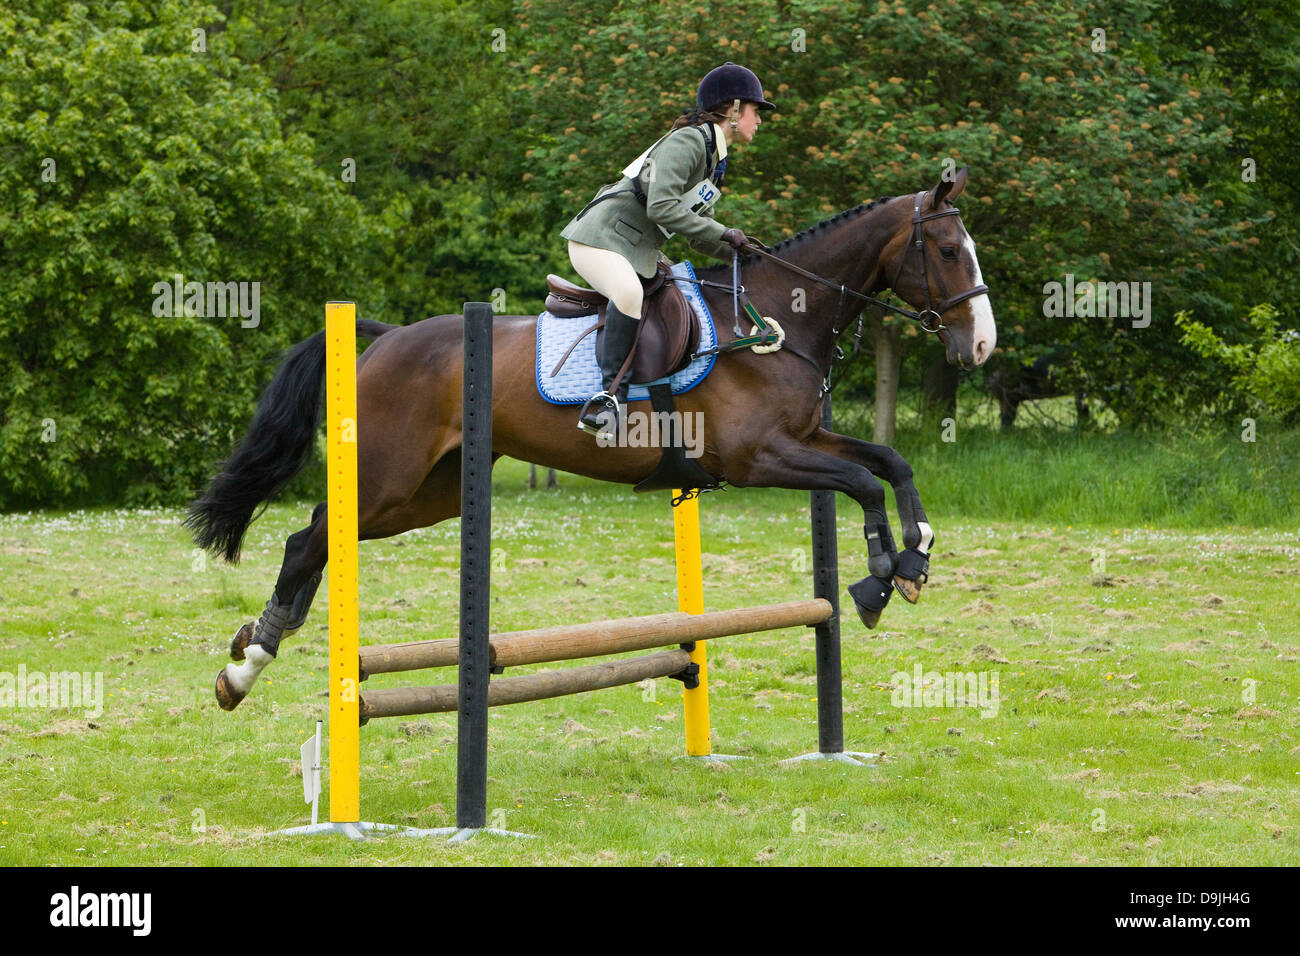 A competitor taking part in a One Day Event. The event is made up of Dressage, Show Jumping and Cross Country. Stock Photo